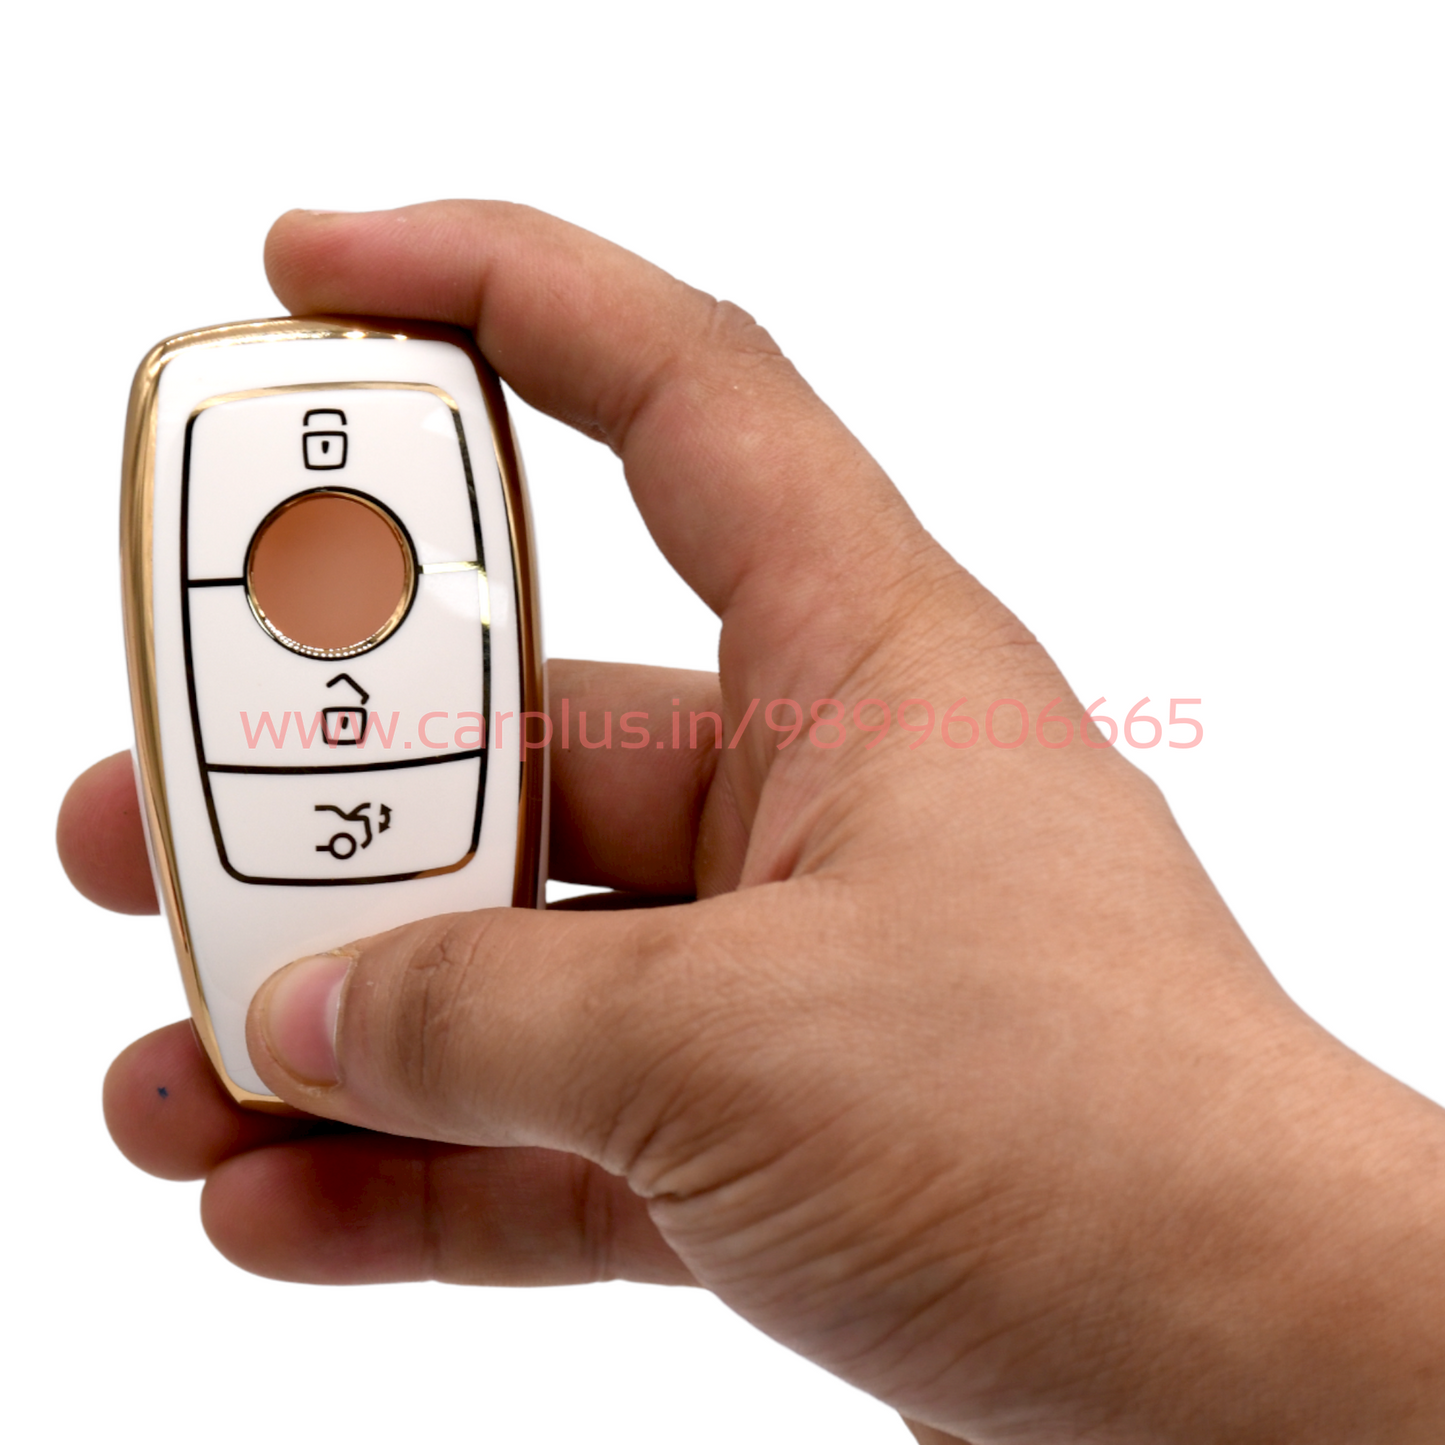 
                  
                    KMH - TPU Gold Car Key Cover Compatible with Benz E Series and S Series 3 Button Smart Key Cover-TPU GOLD KEY COVER-KMH-KEY COVER-Black-CARPLUS
                  
                